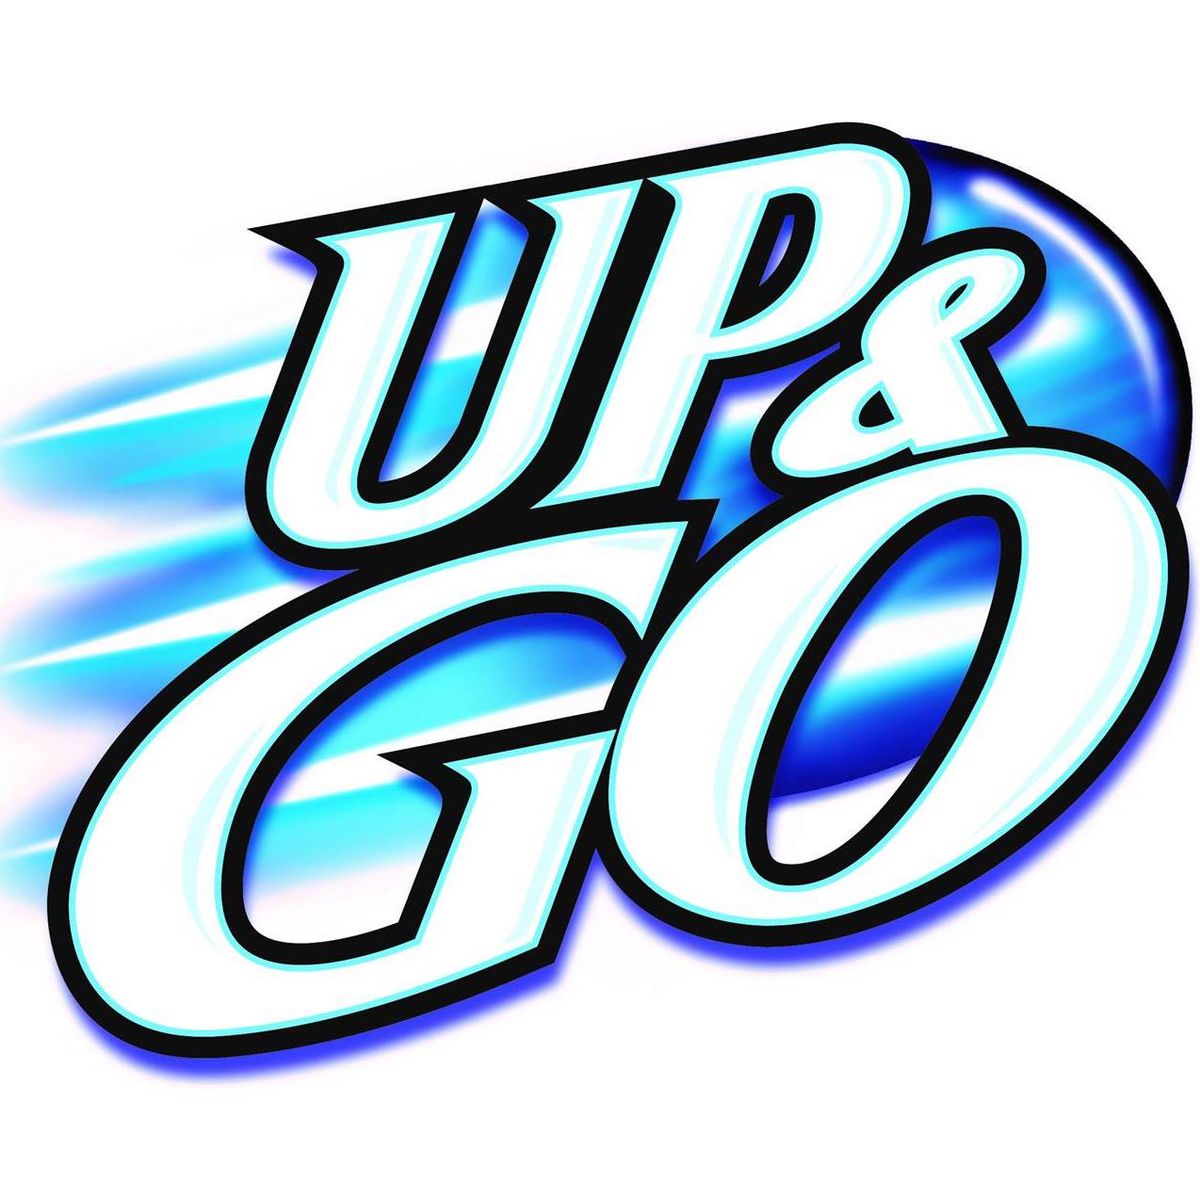 Up & Go Energize â€“ Outlast the morning with SnapchatÂ 